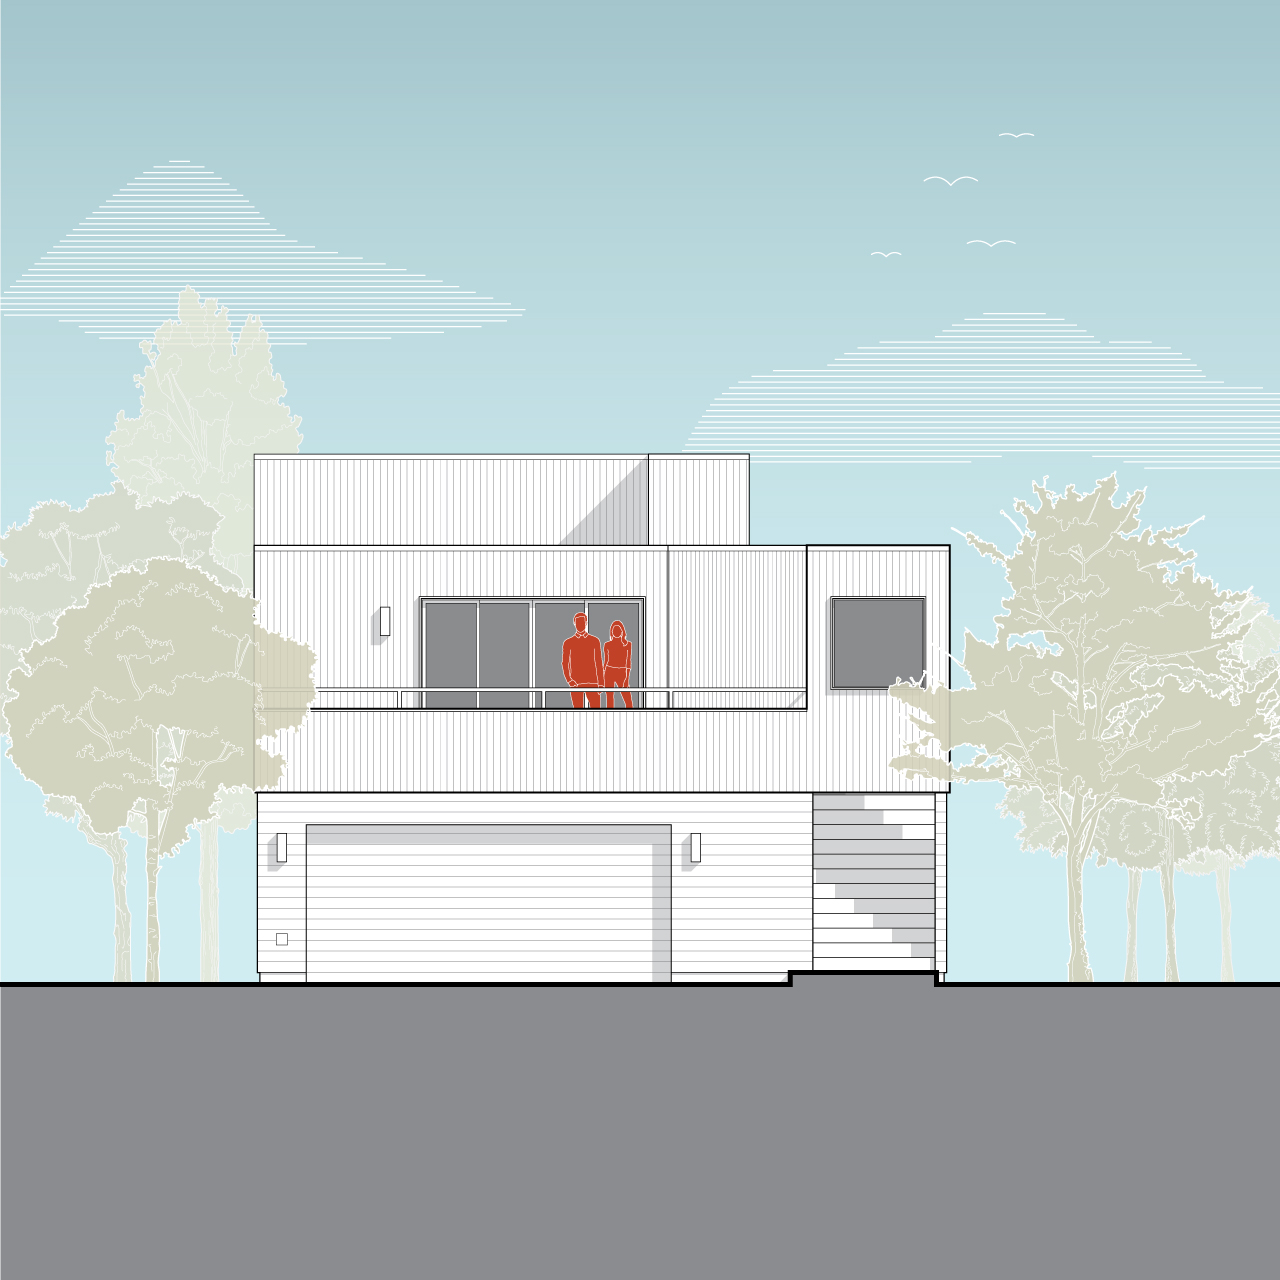 This is a drawing of the front elevation showing the proposed exterior remodel.